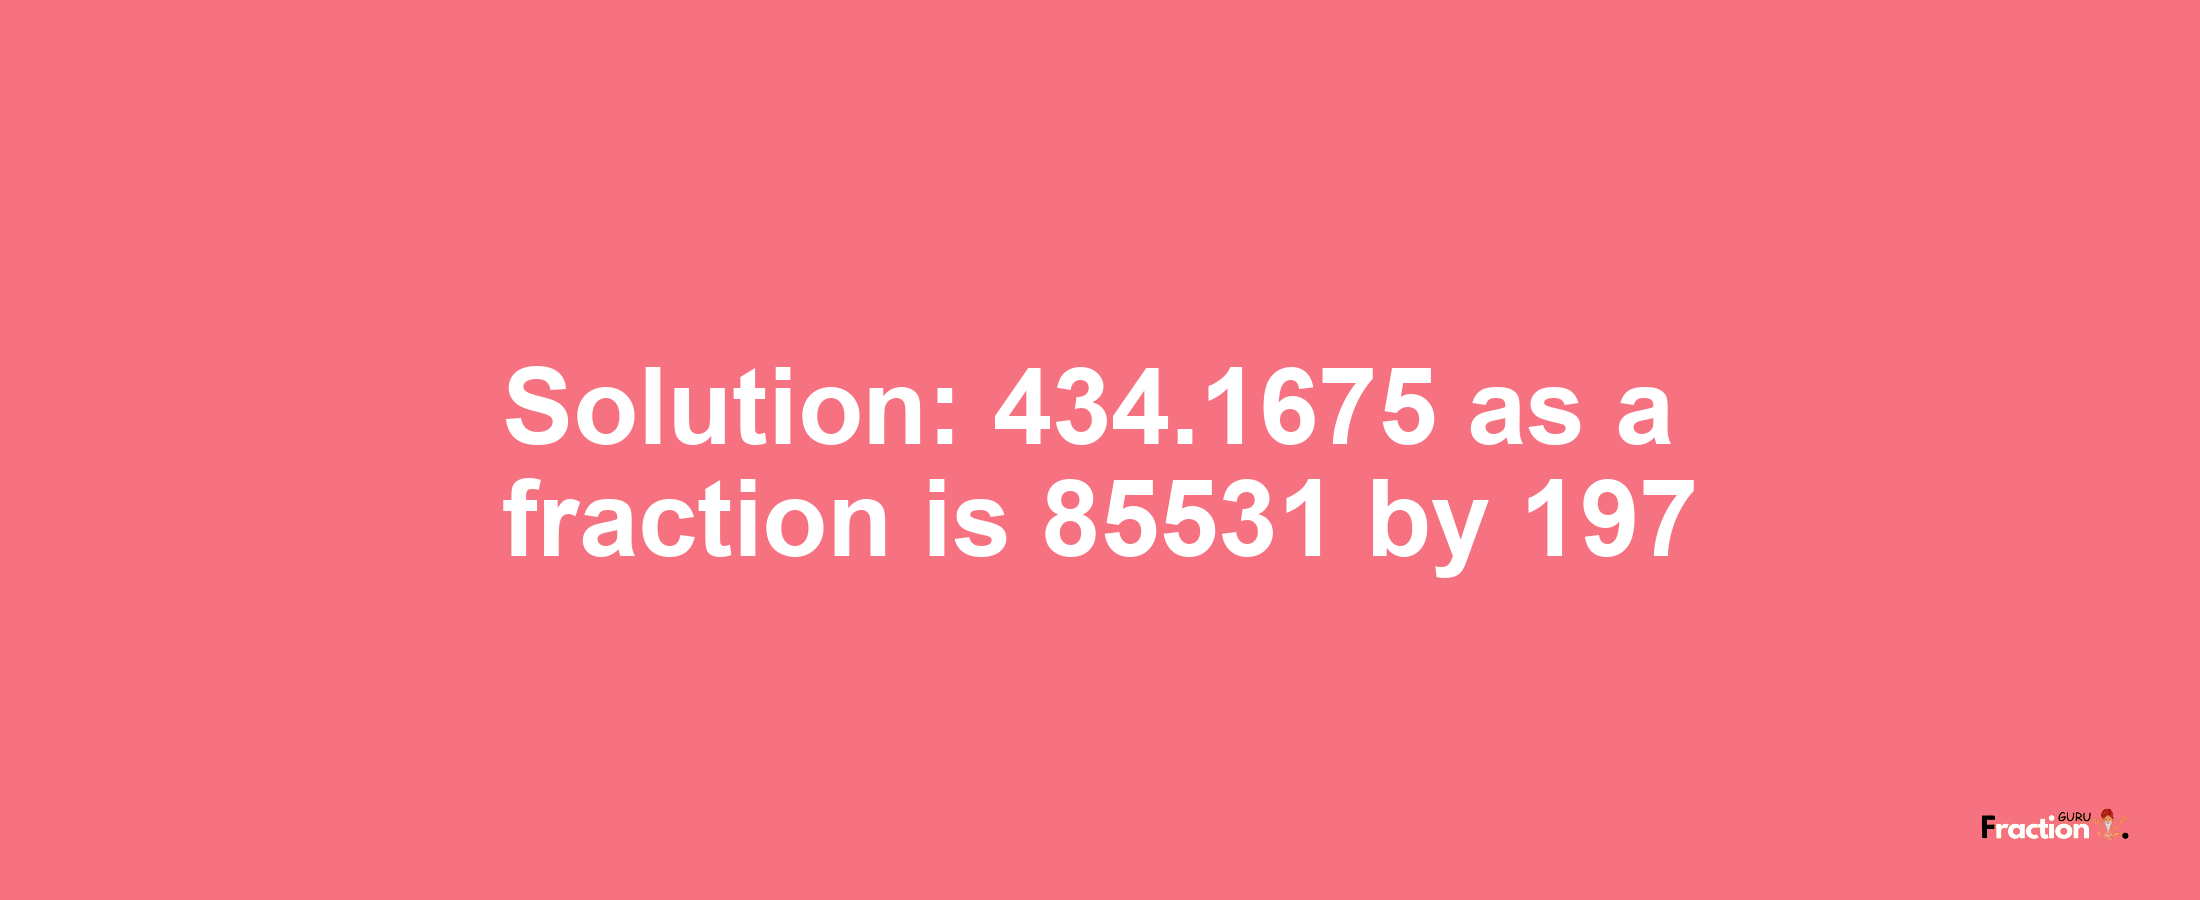 Solution:434.1675 as a fraction is 85531/197